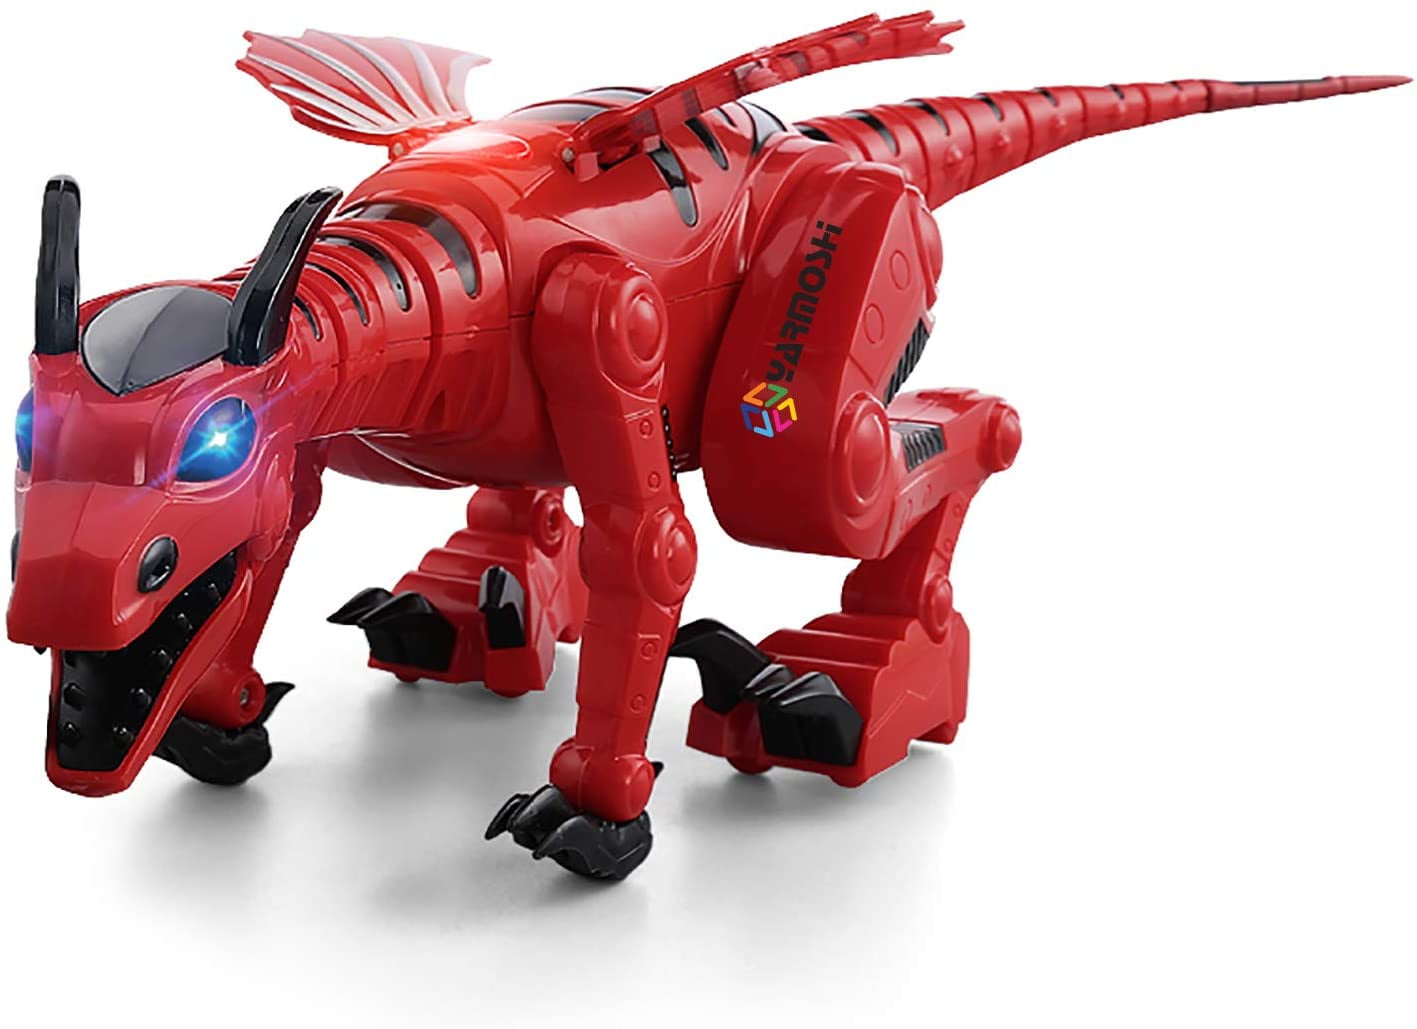 Robo Alive Dragon Mythical Creature Real Life Pet Robotic Kids Toys Xmas Toy 